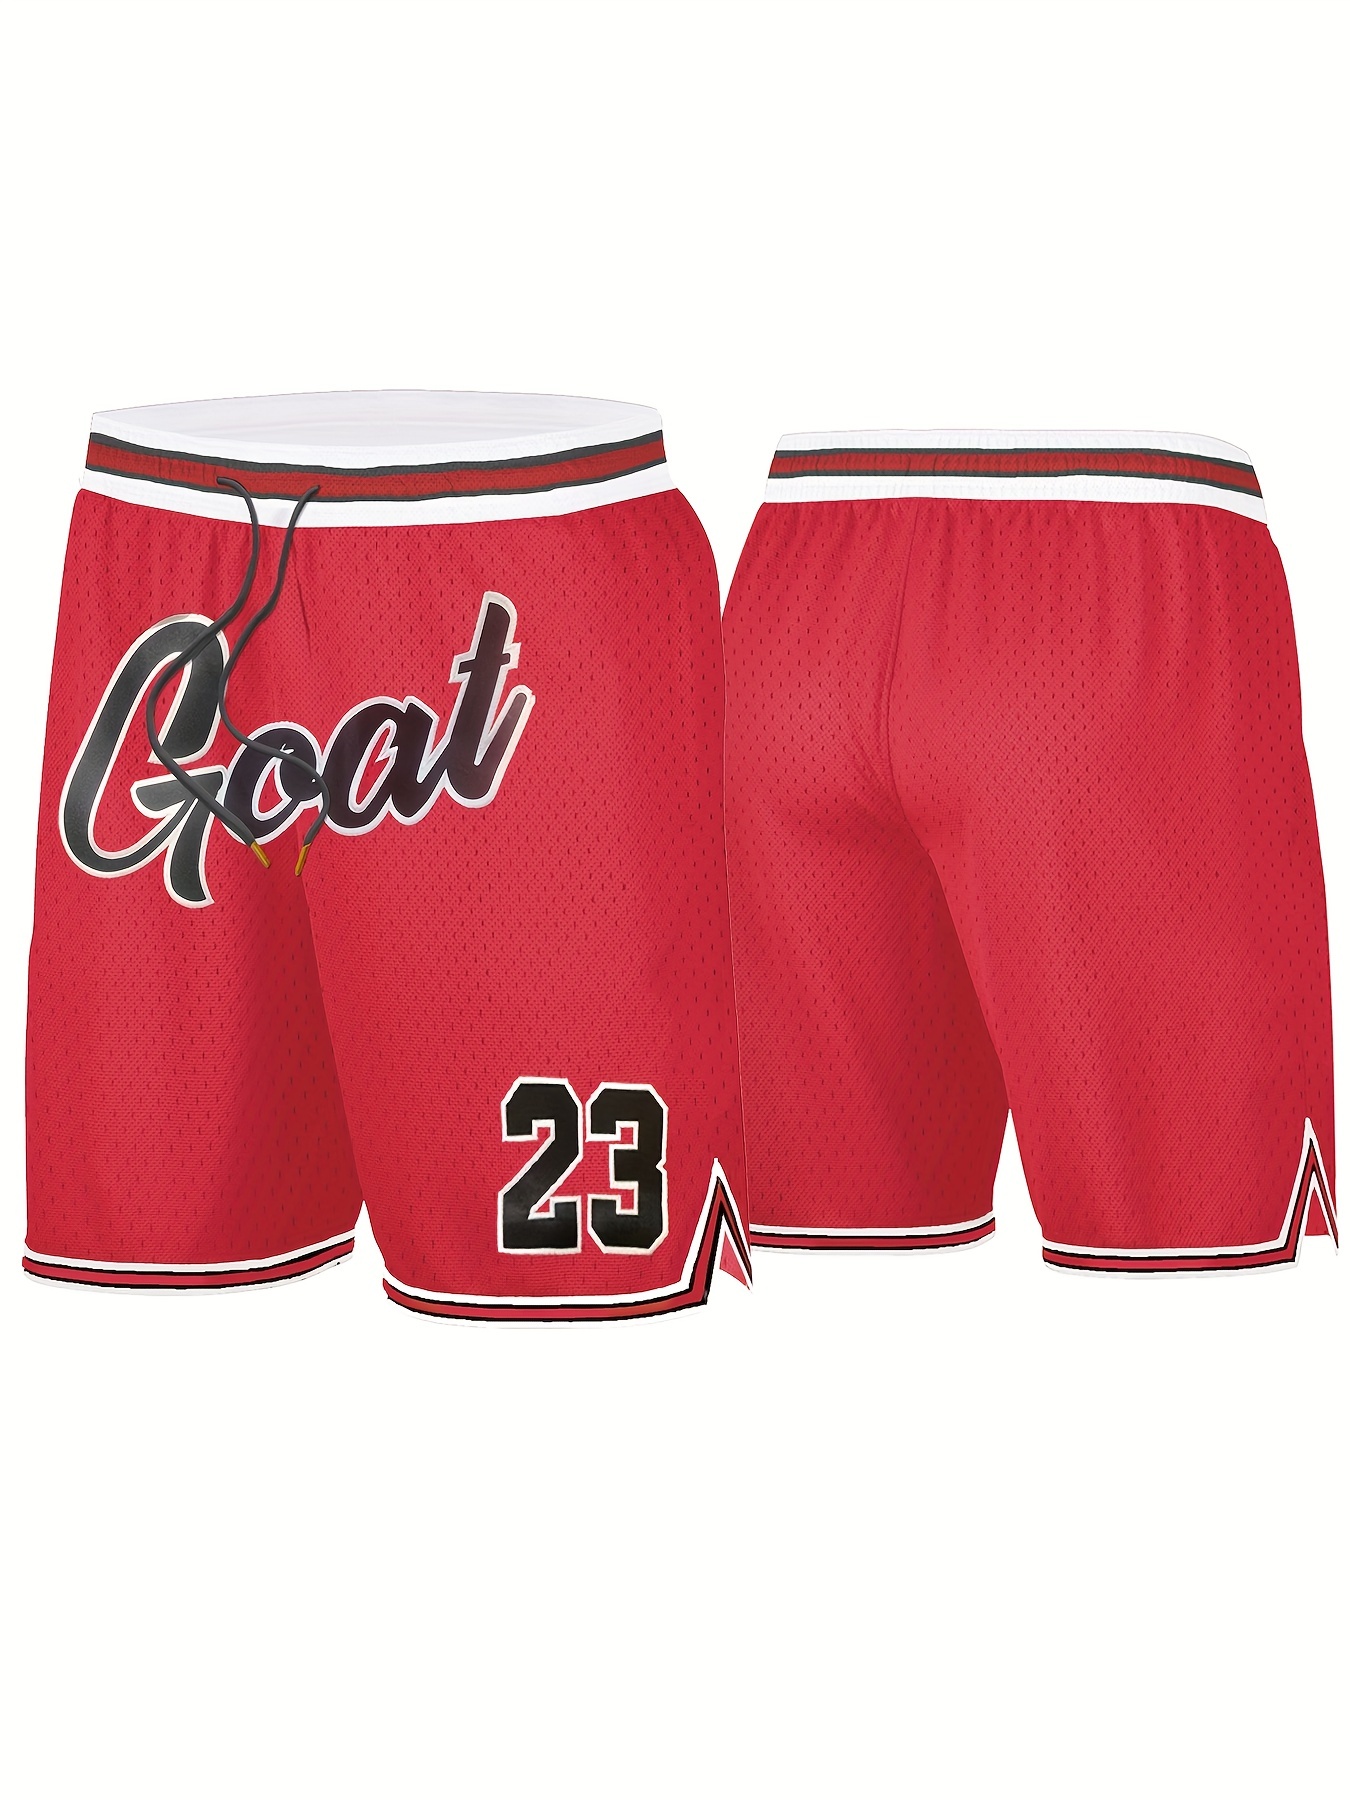 Men's Vintage Goat #23 Basketball Shorts, Active Slightly Stretch  Breathable Mesh Embroidered Loose Shorts For Competition Training Party  Size S-XXXL